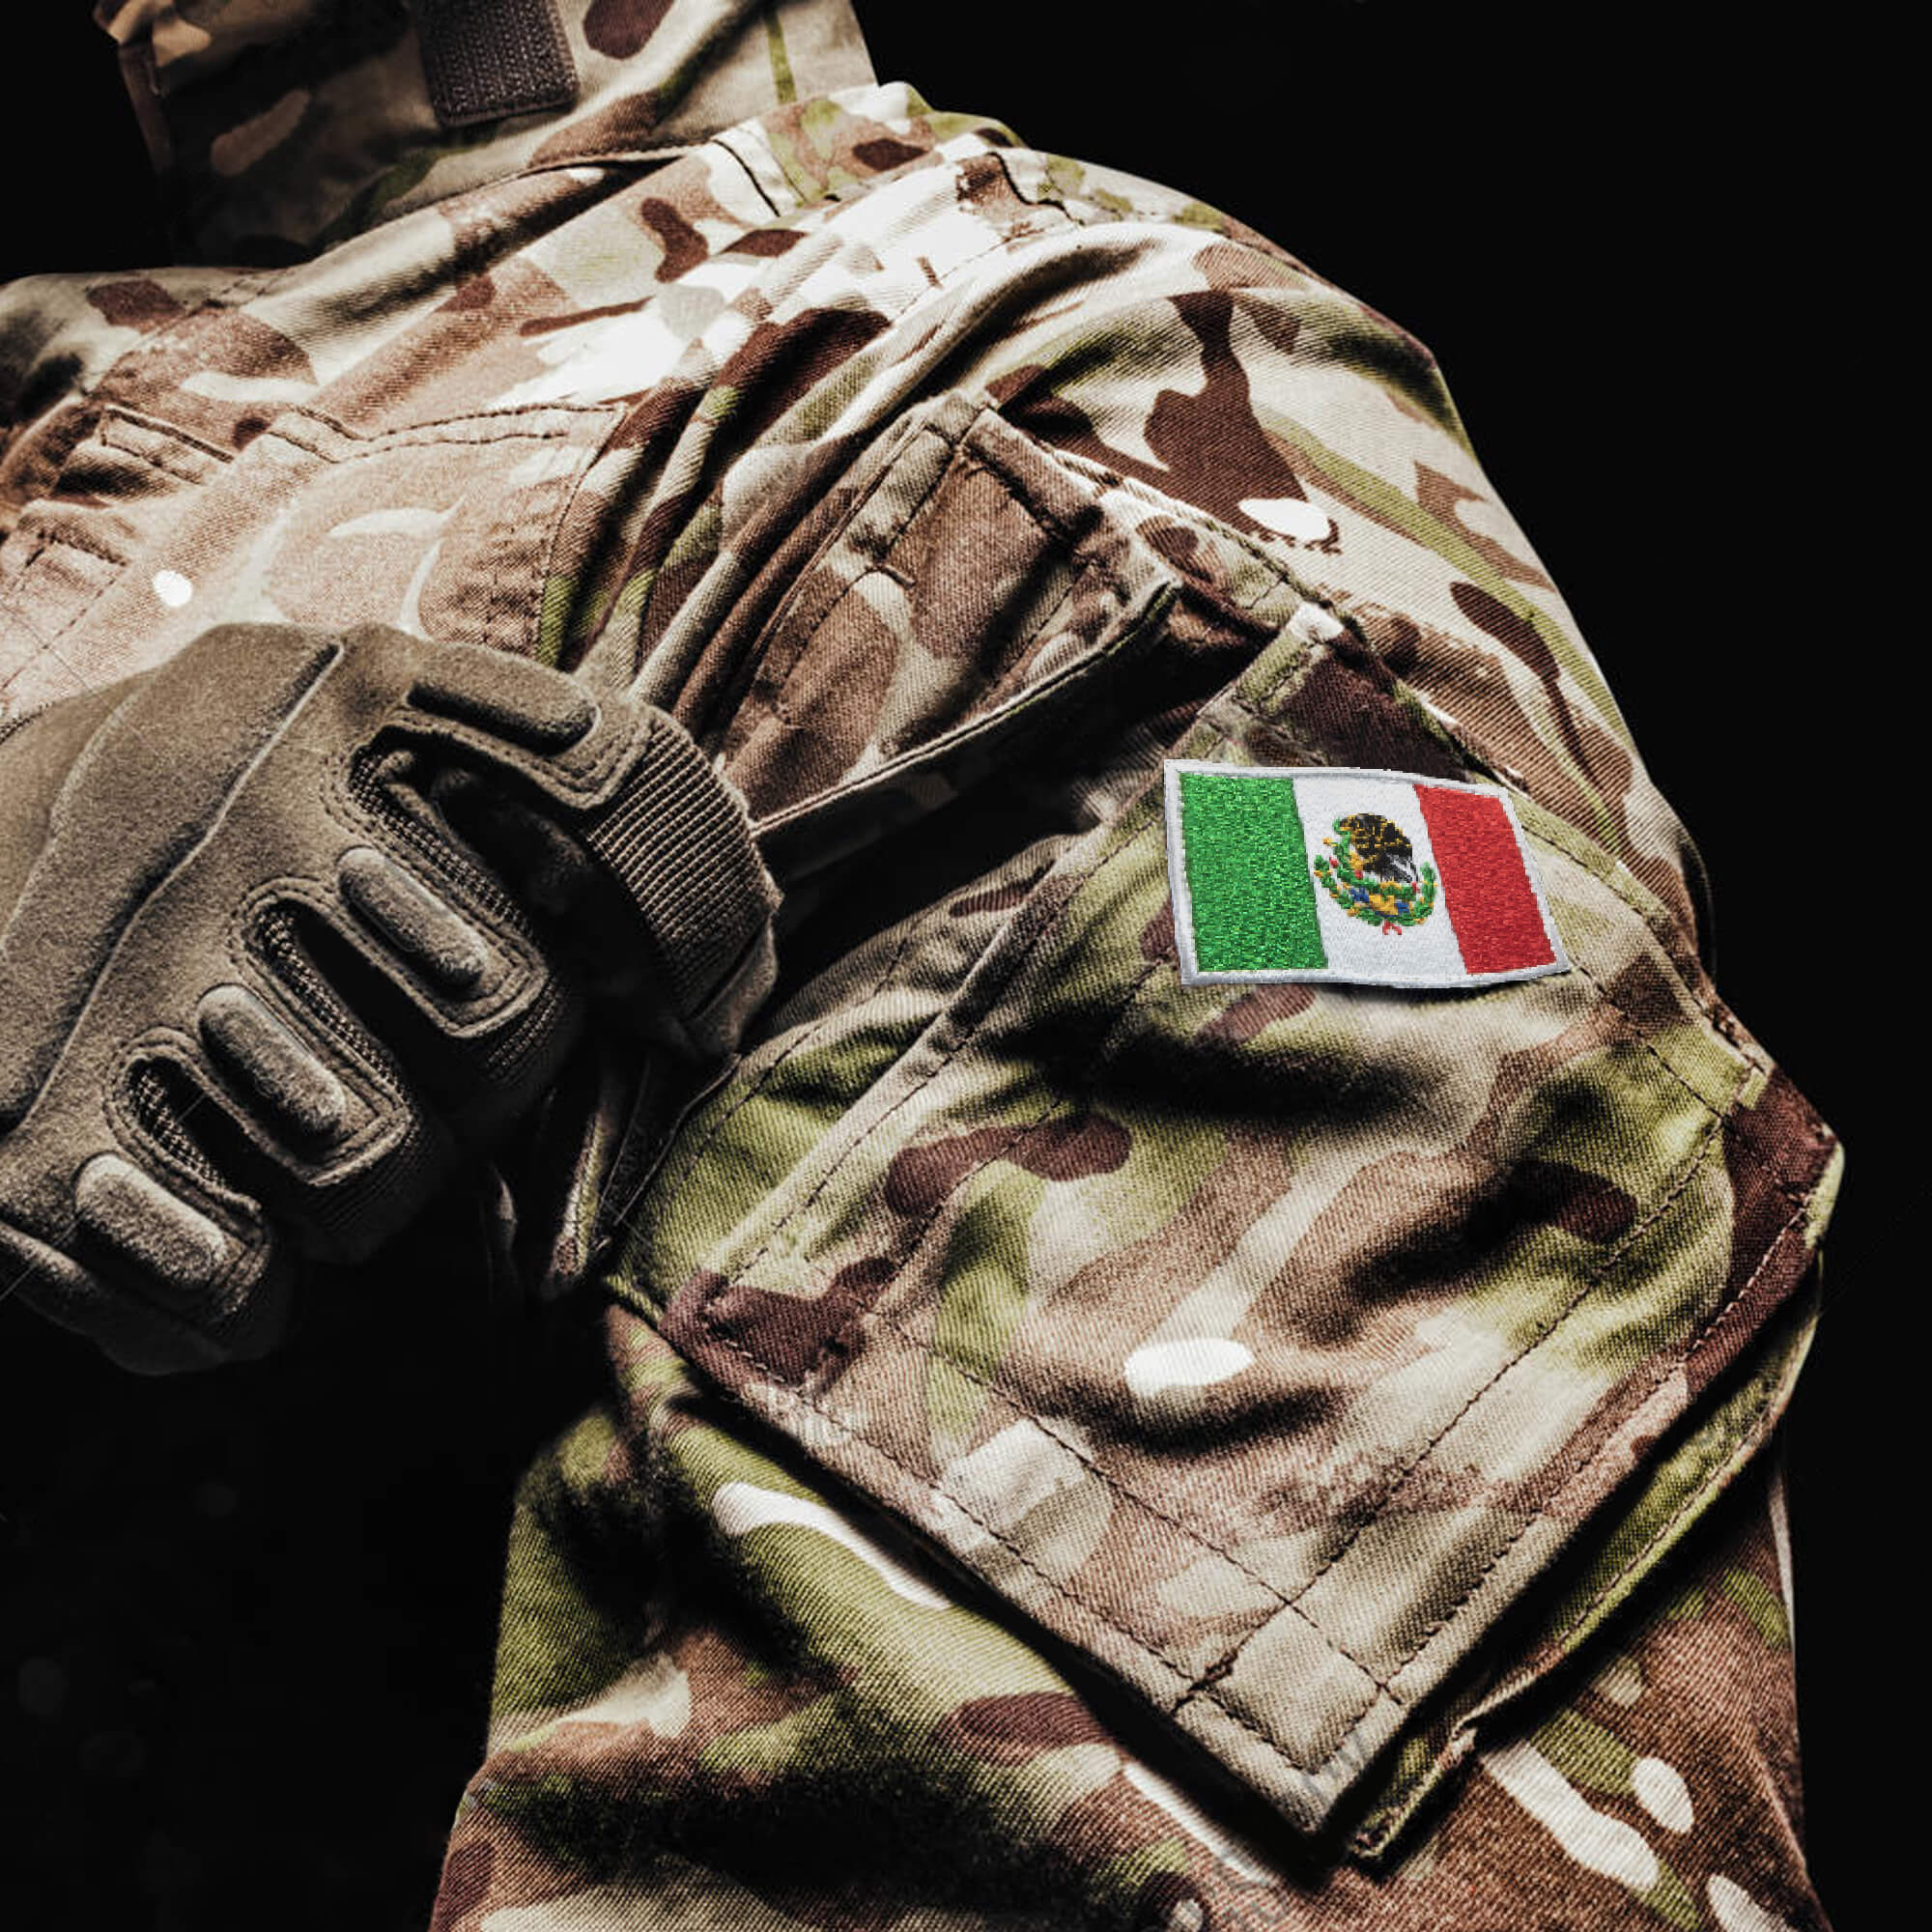 Harsgs 2PCS Mexico Flag Patches, Hook ＆ Loop Tactical  Morale Patch Full Embroidery Military Patch for Caps Bags Vests Military  Uniforms 価格比較